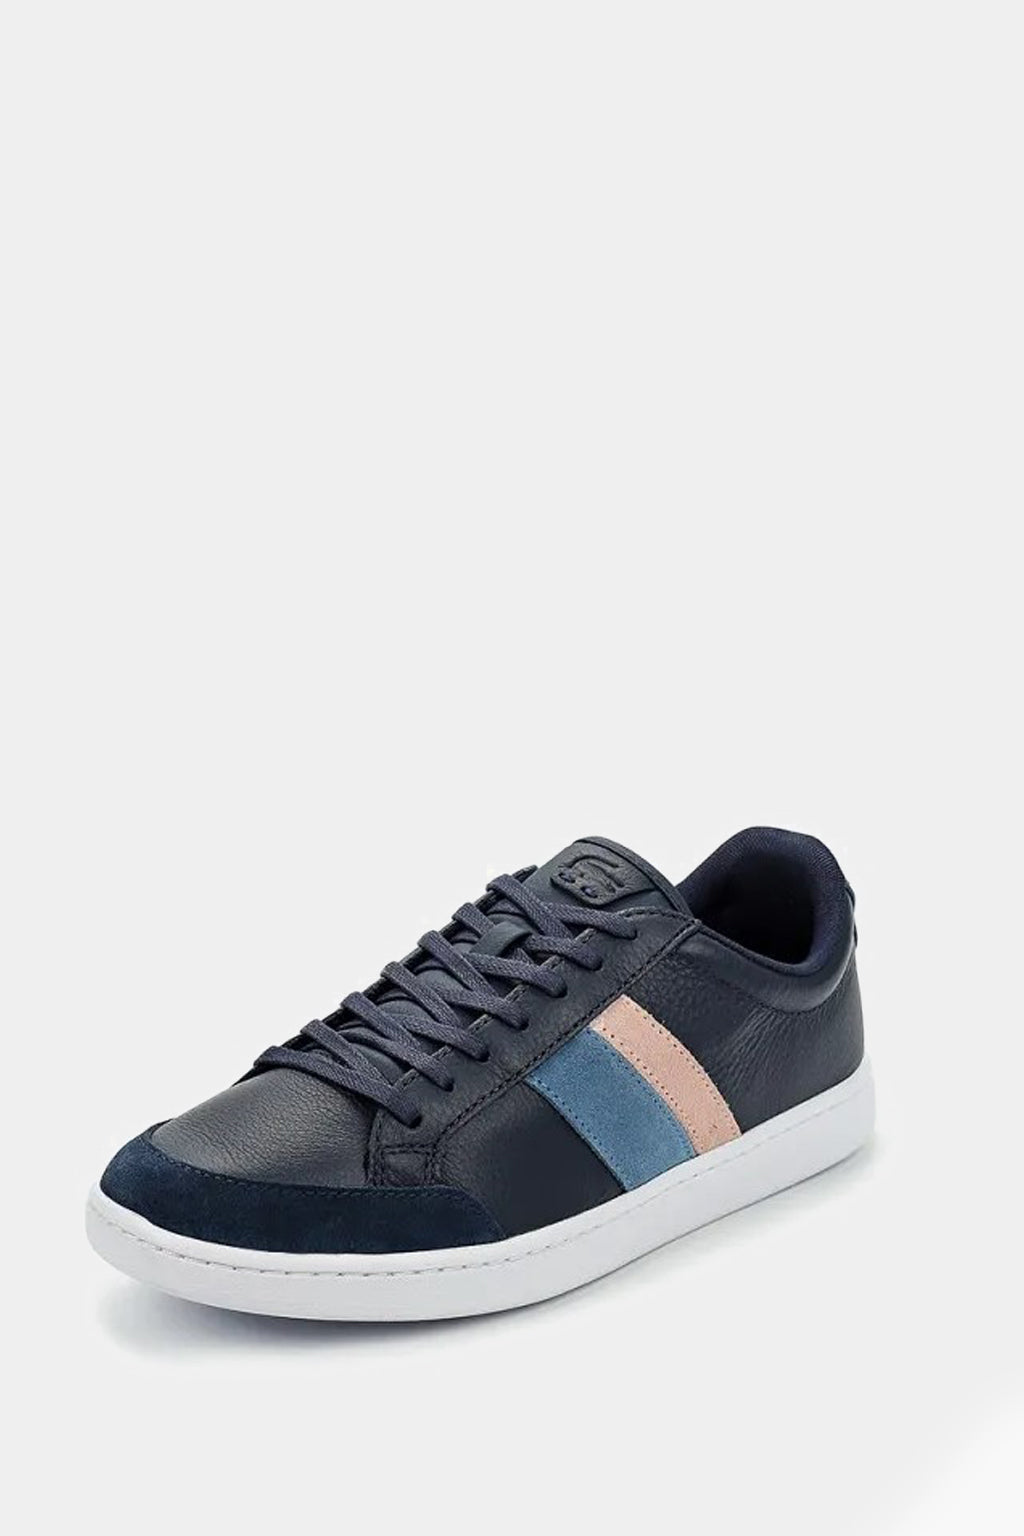 Lacoste - Sneakers Carnaby Ace 120 1 Sfa